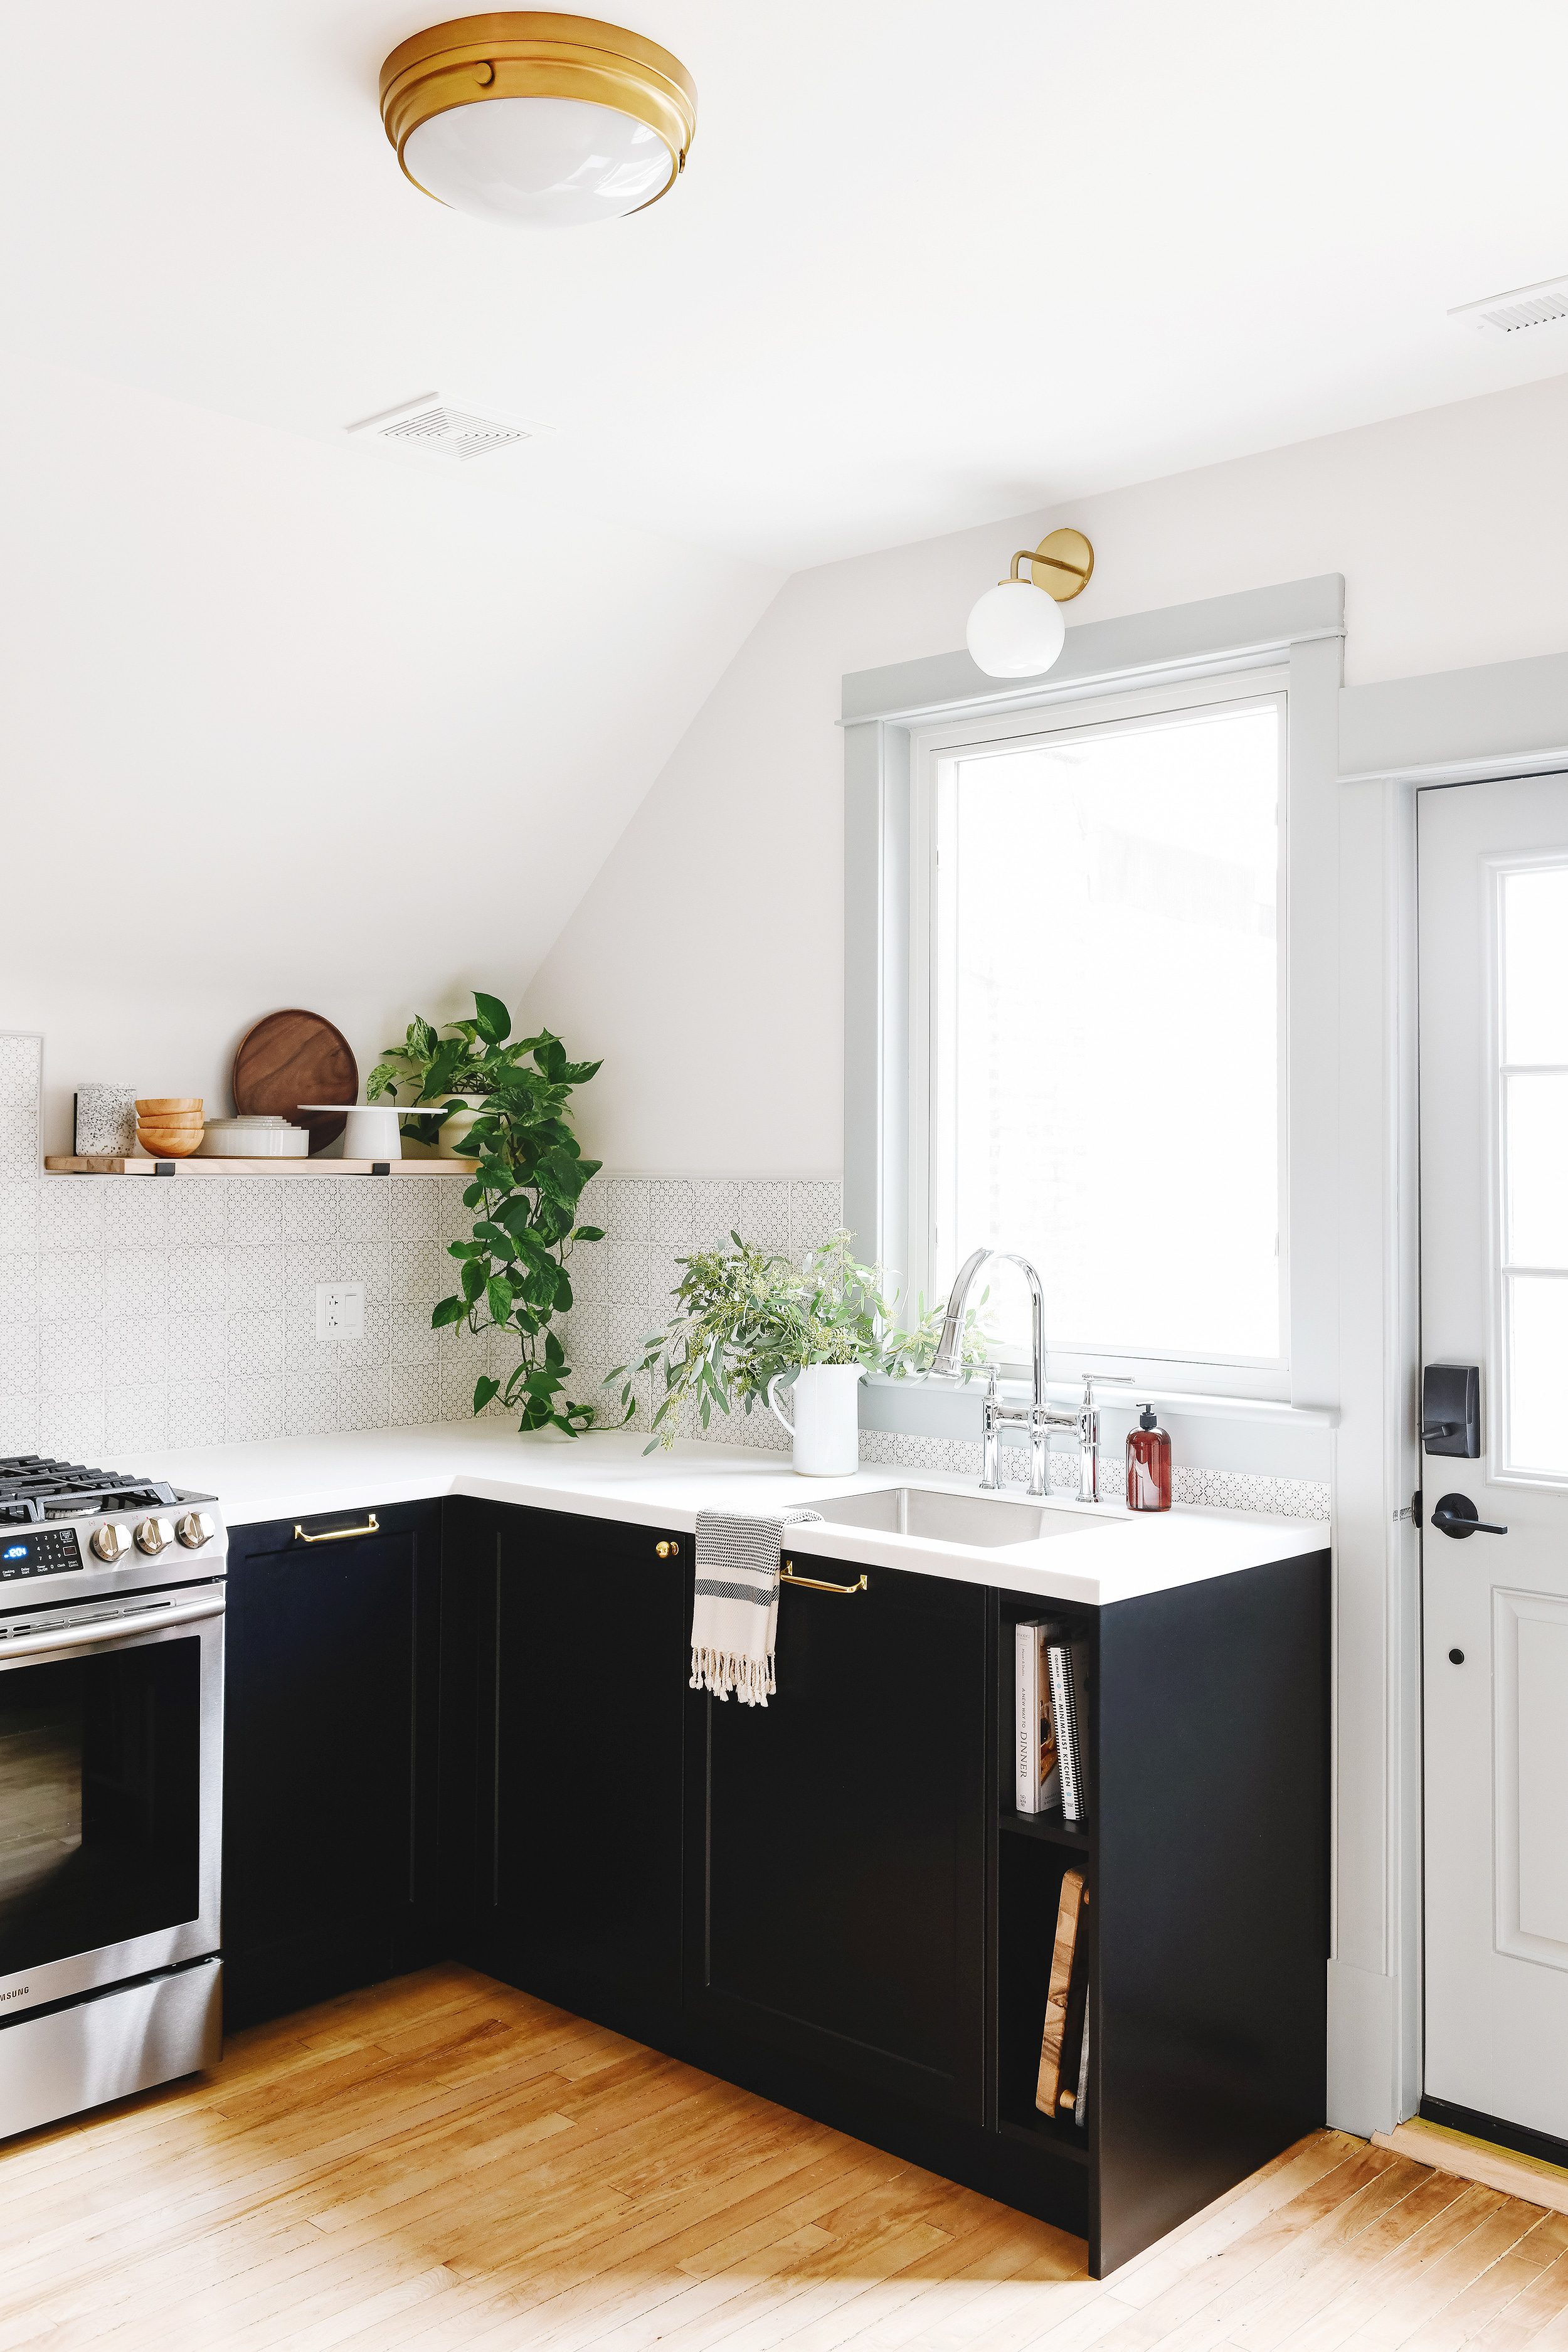 Small kitchen inspiration: Black base cabinets with floating shelves above a white countertop, polished chrome Elkay faucet and stainless steel sink. | via Yellow Brick Home